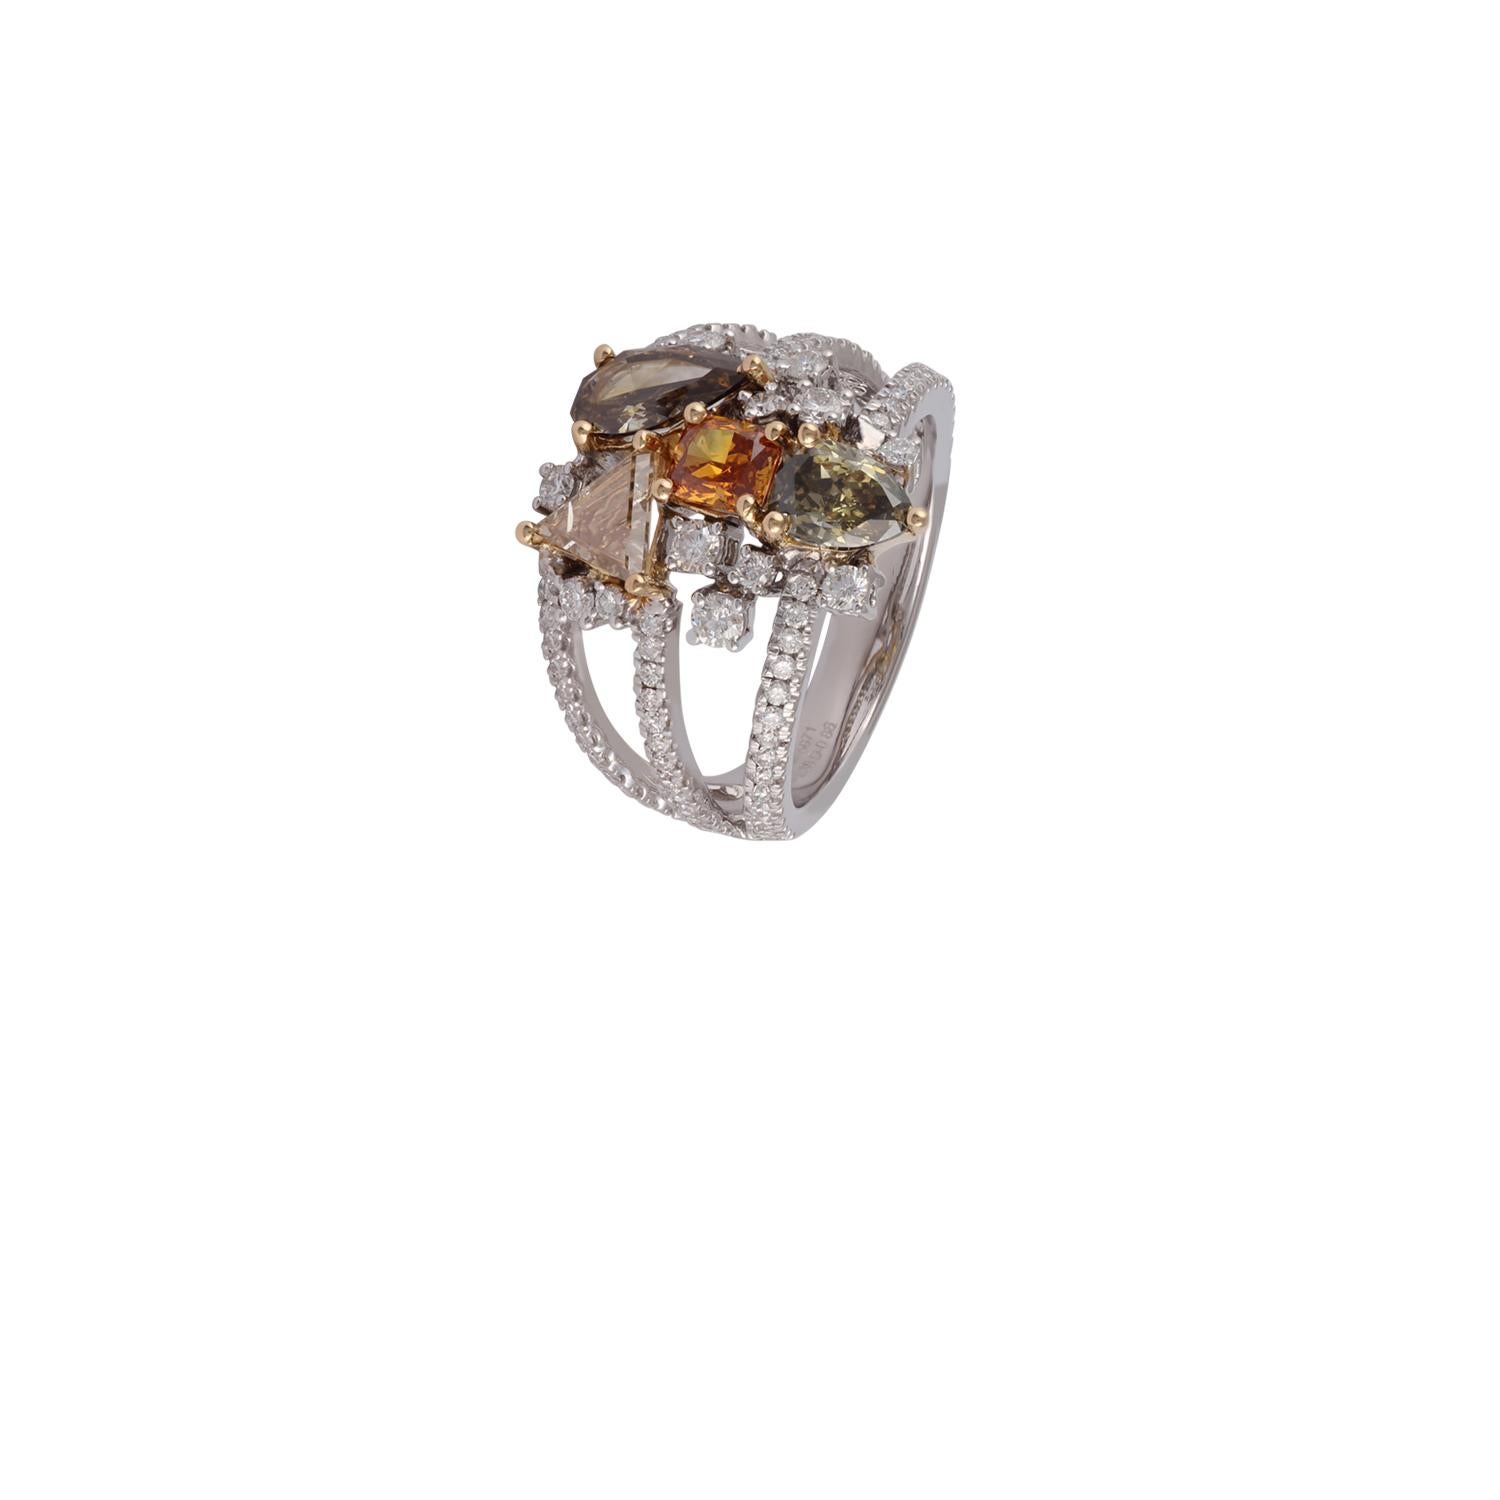 Mixed Cut 3.18 Carat Natural Fancy Diamond Ring Band in 18K White, Yellow & Rose Gold For Sale